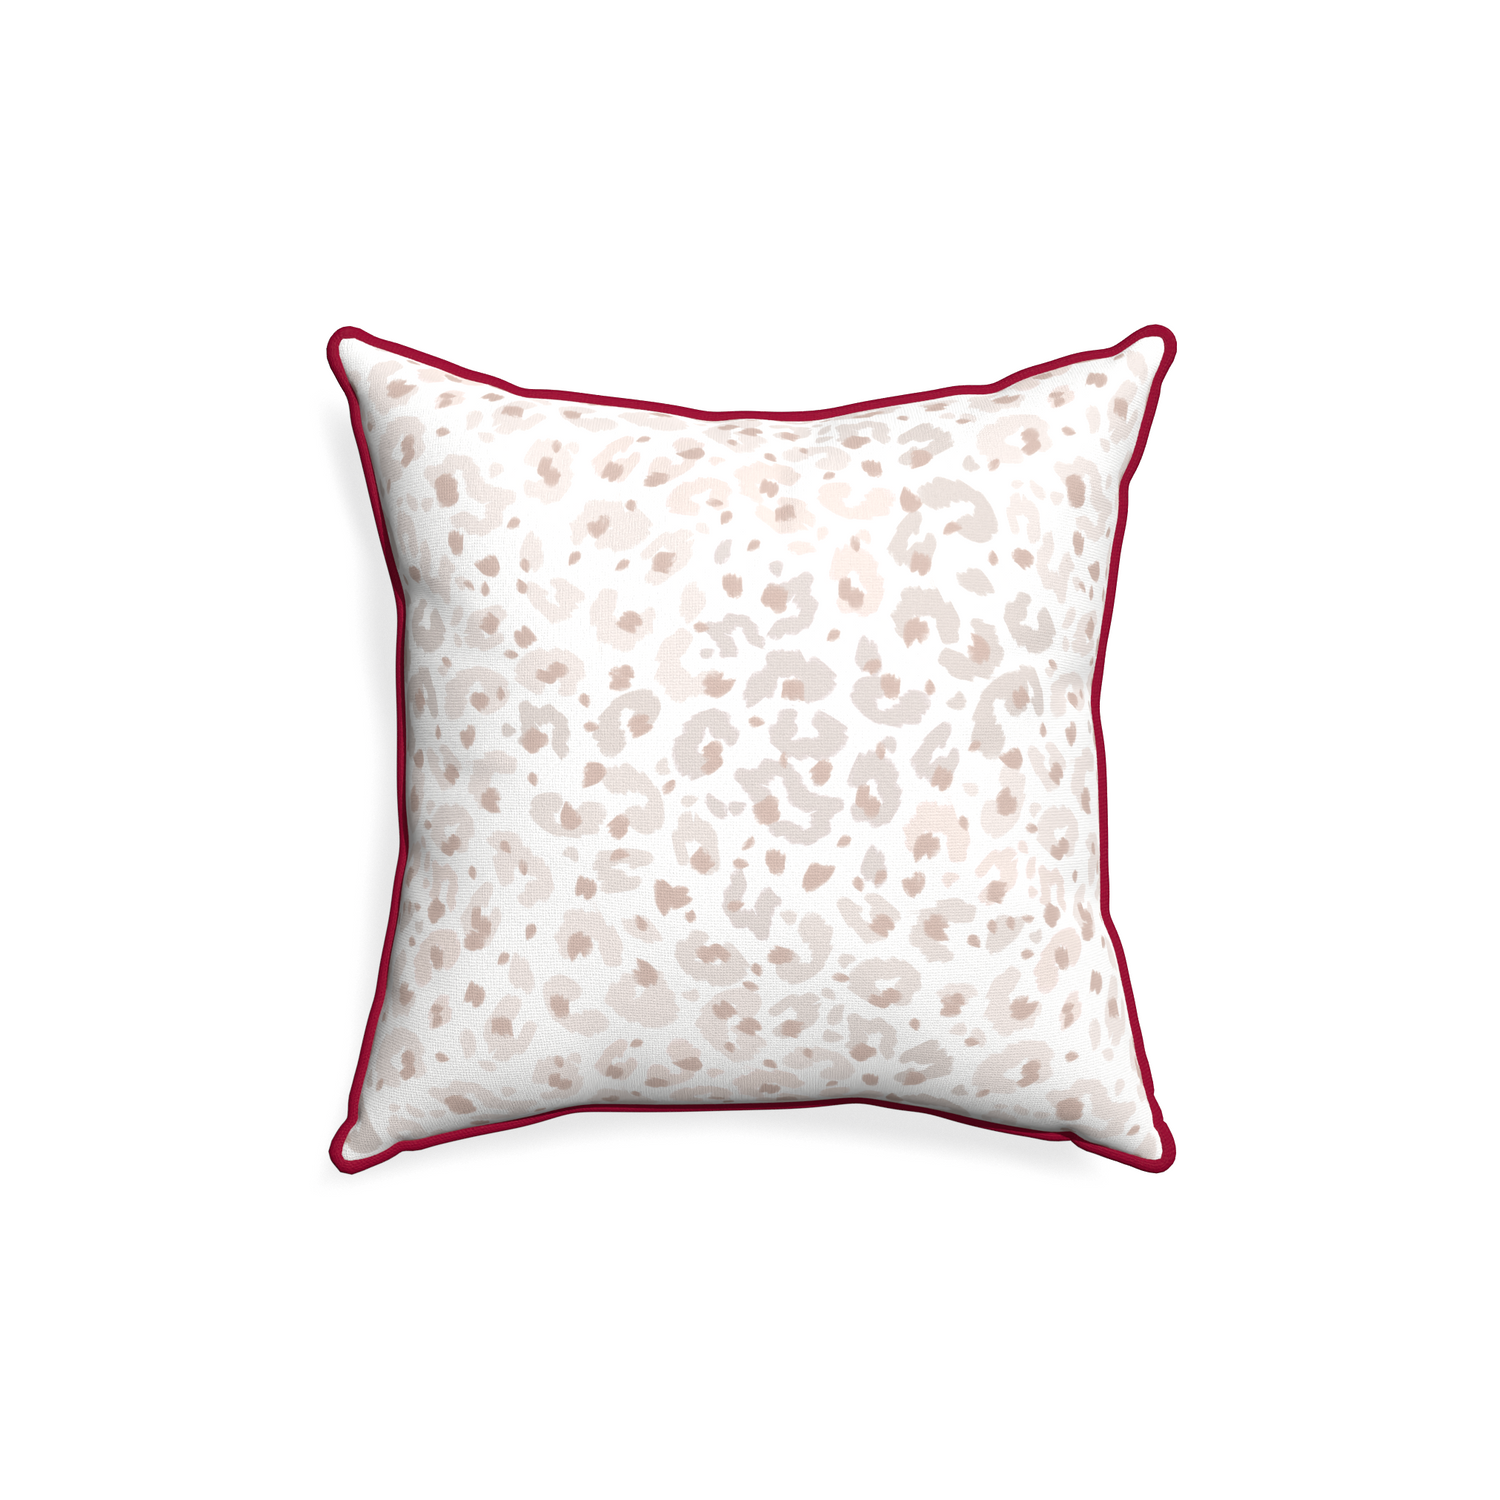 18-square rosie custom beige animal printpillow with raspberry piping on white background